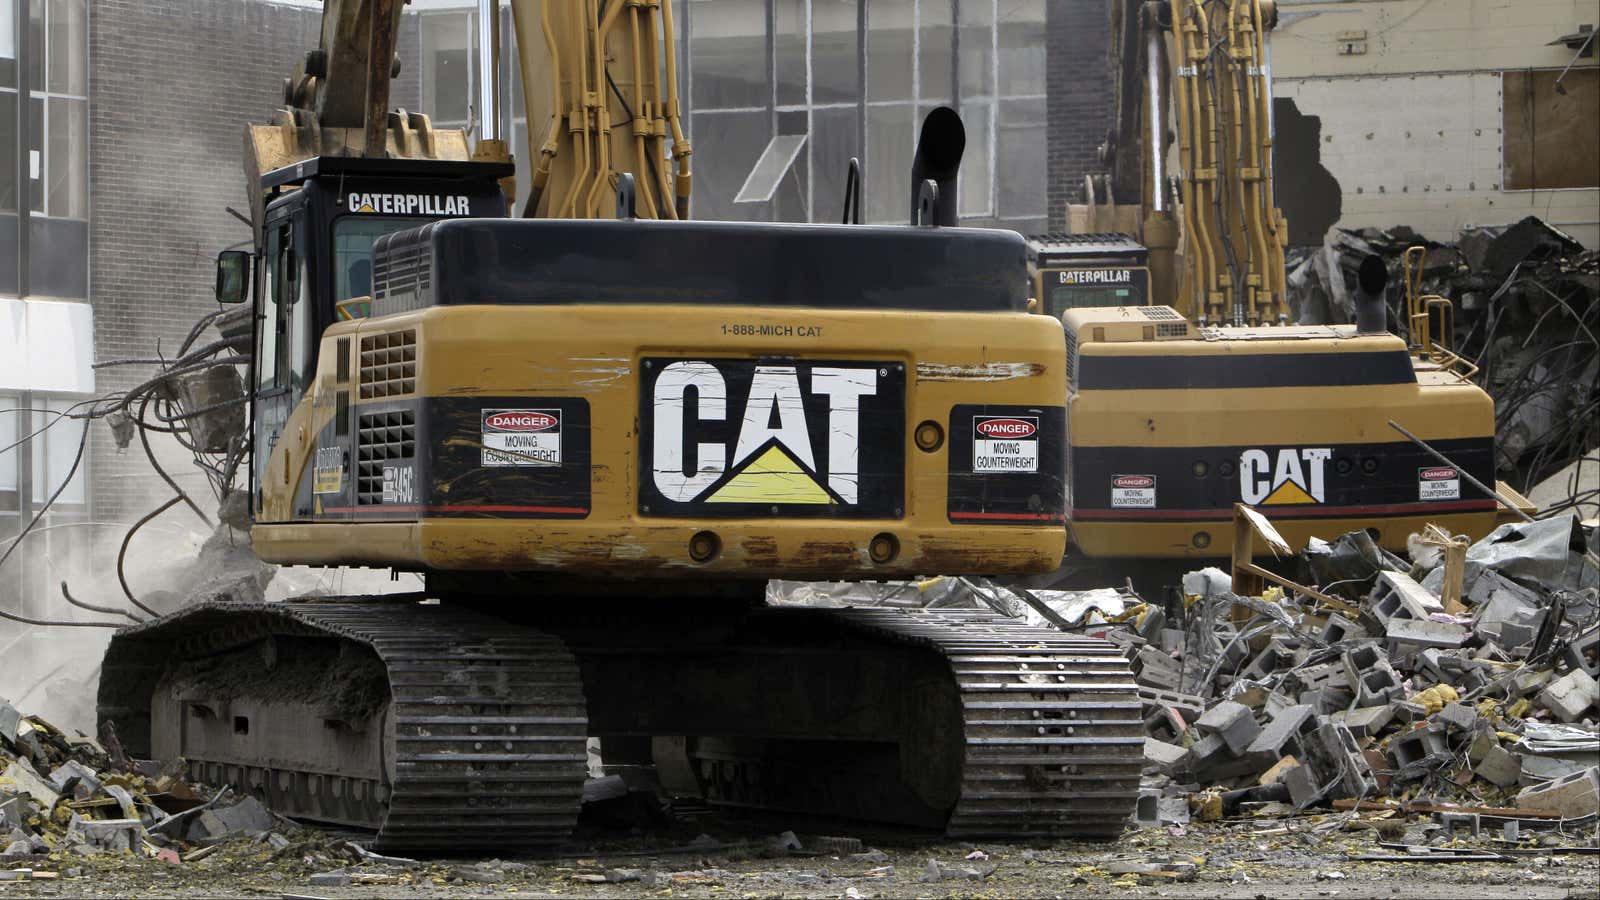 Caterpillar’s earnings have been crushed by a $580 million accounting scandal in China.